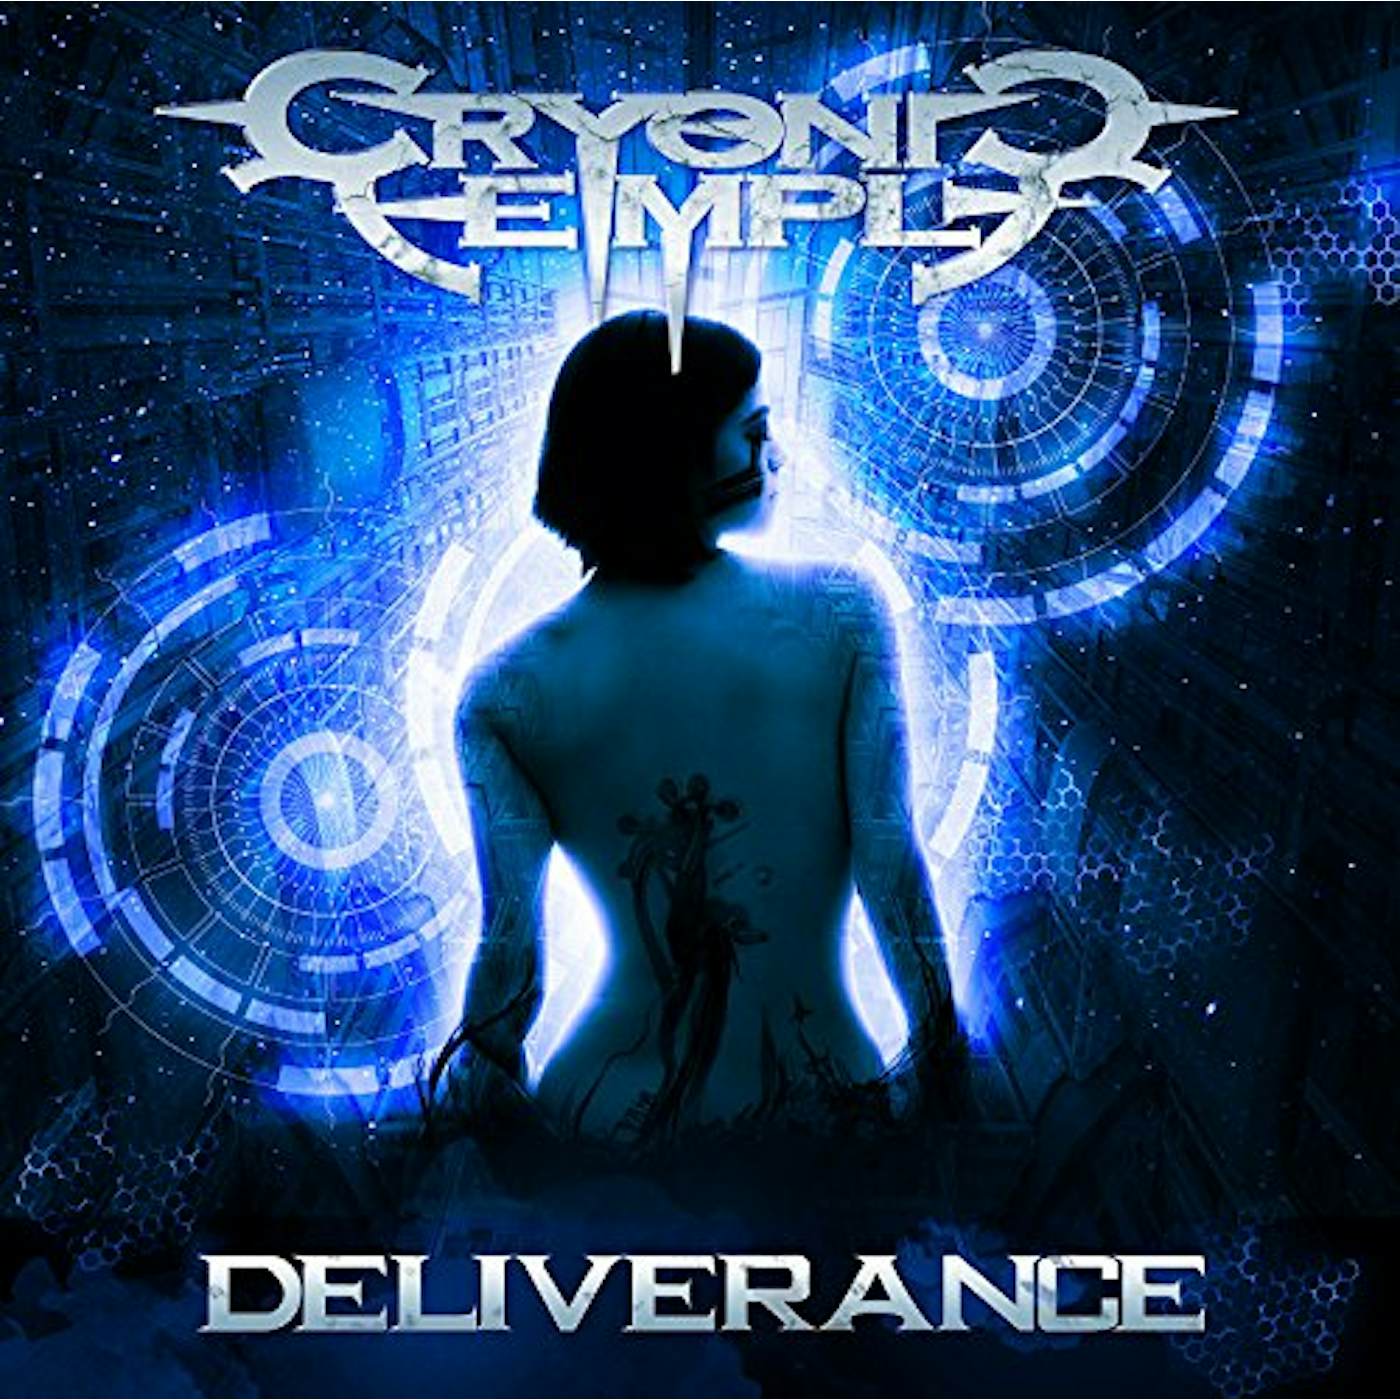 Cryonic Temple DELIVERANCE CD